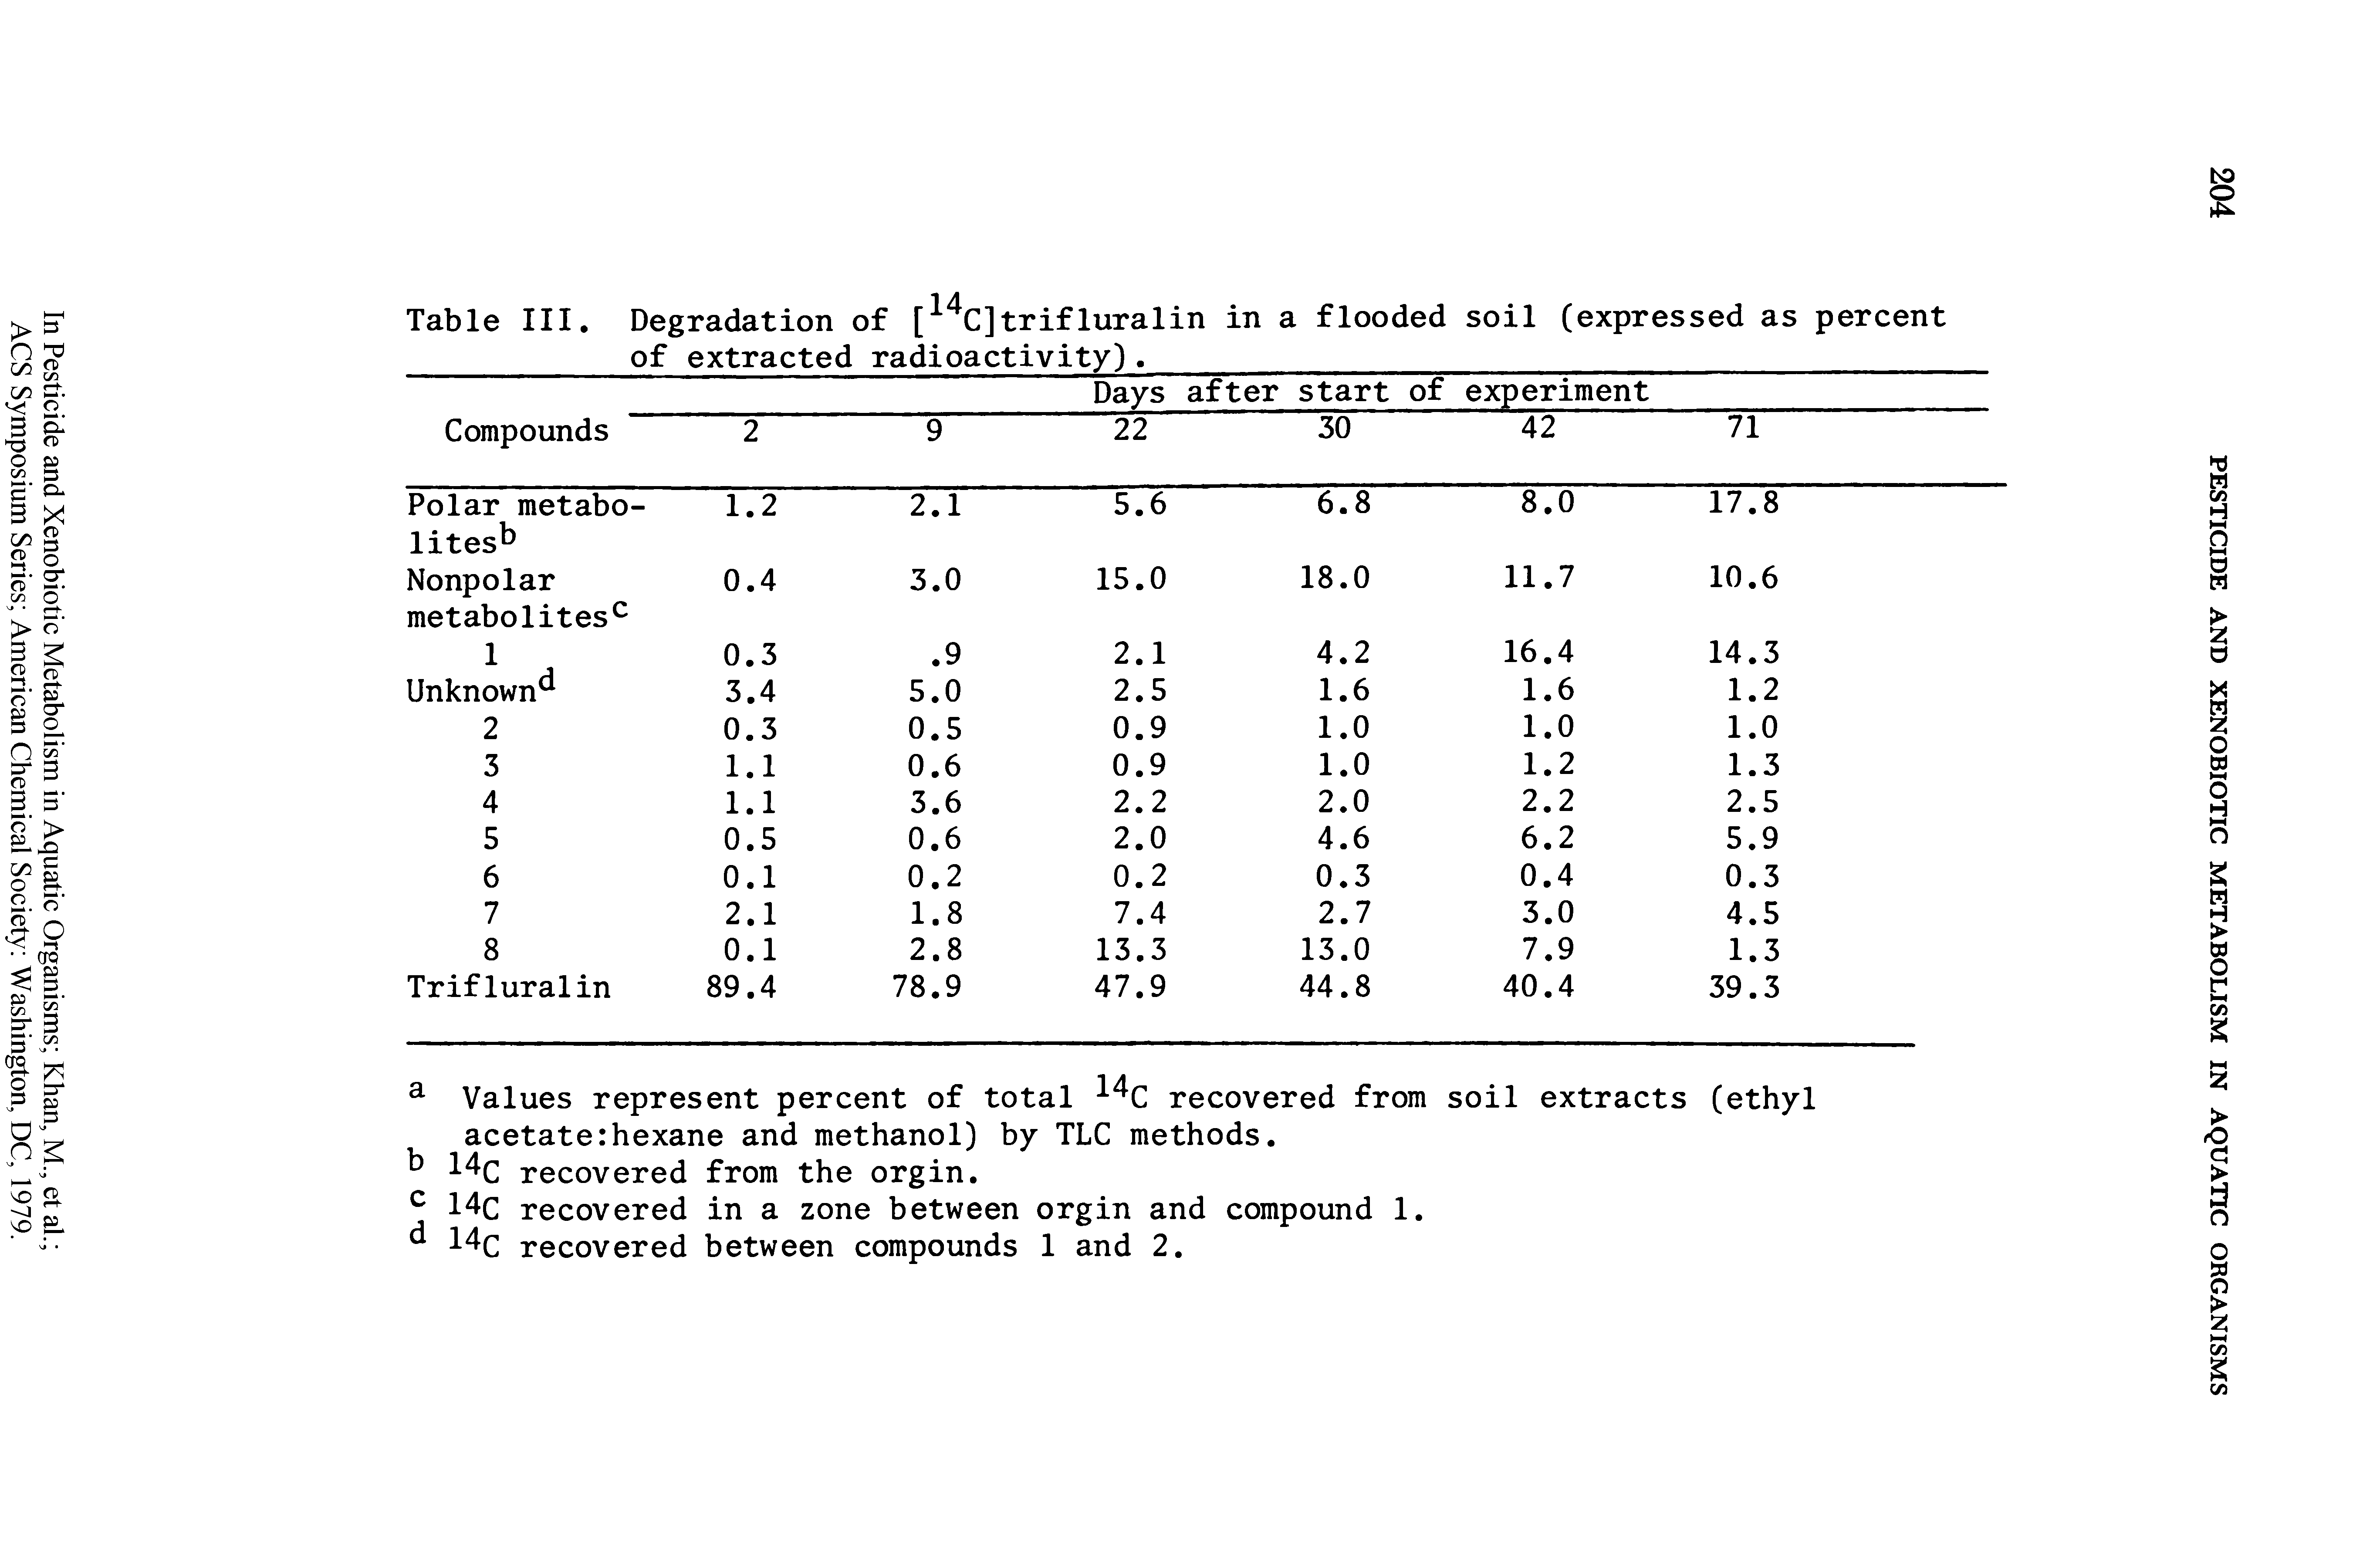 Table III. Degradation of [14C]trifluralin in a flooded soil (expressed as percent of extracted radioactivity). ...